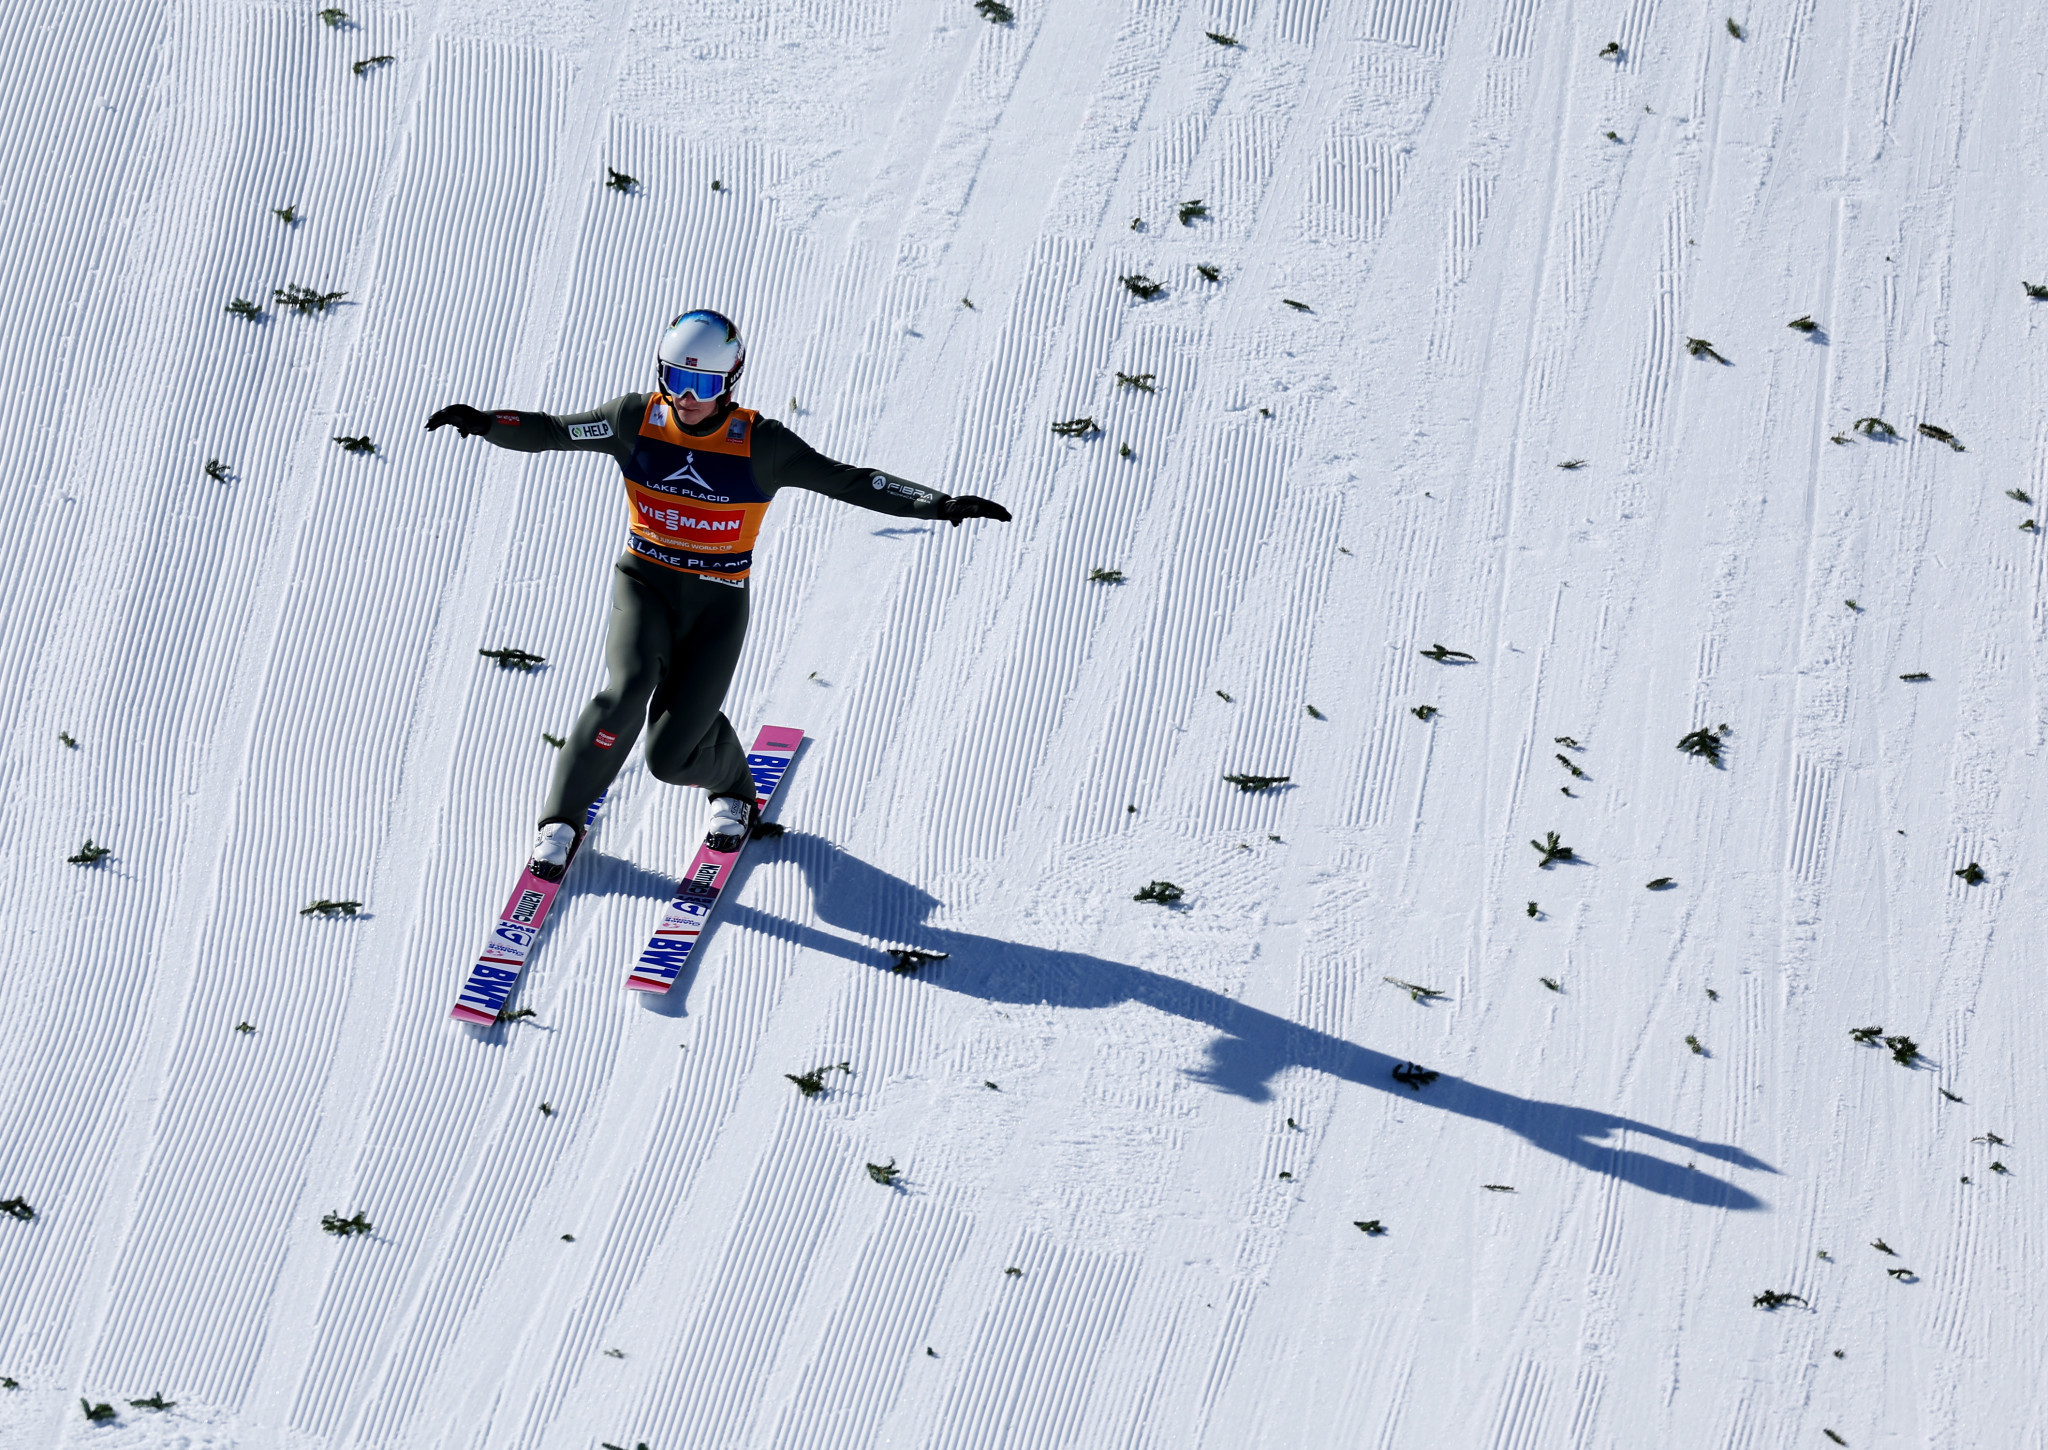 Granerud's 11th victory of the season extends FIS Ski Jumping World Cup lead